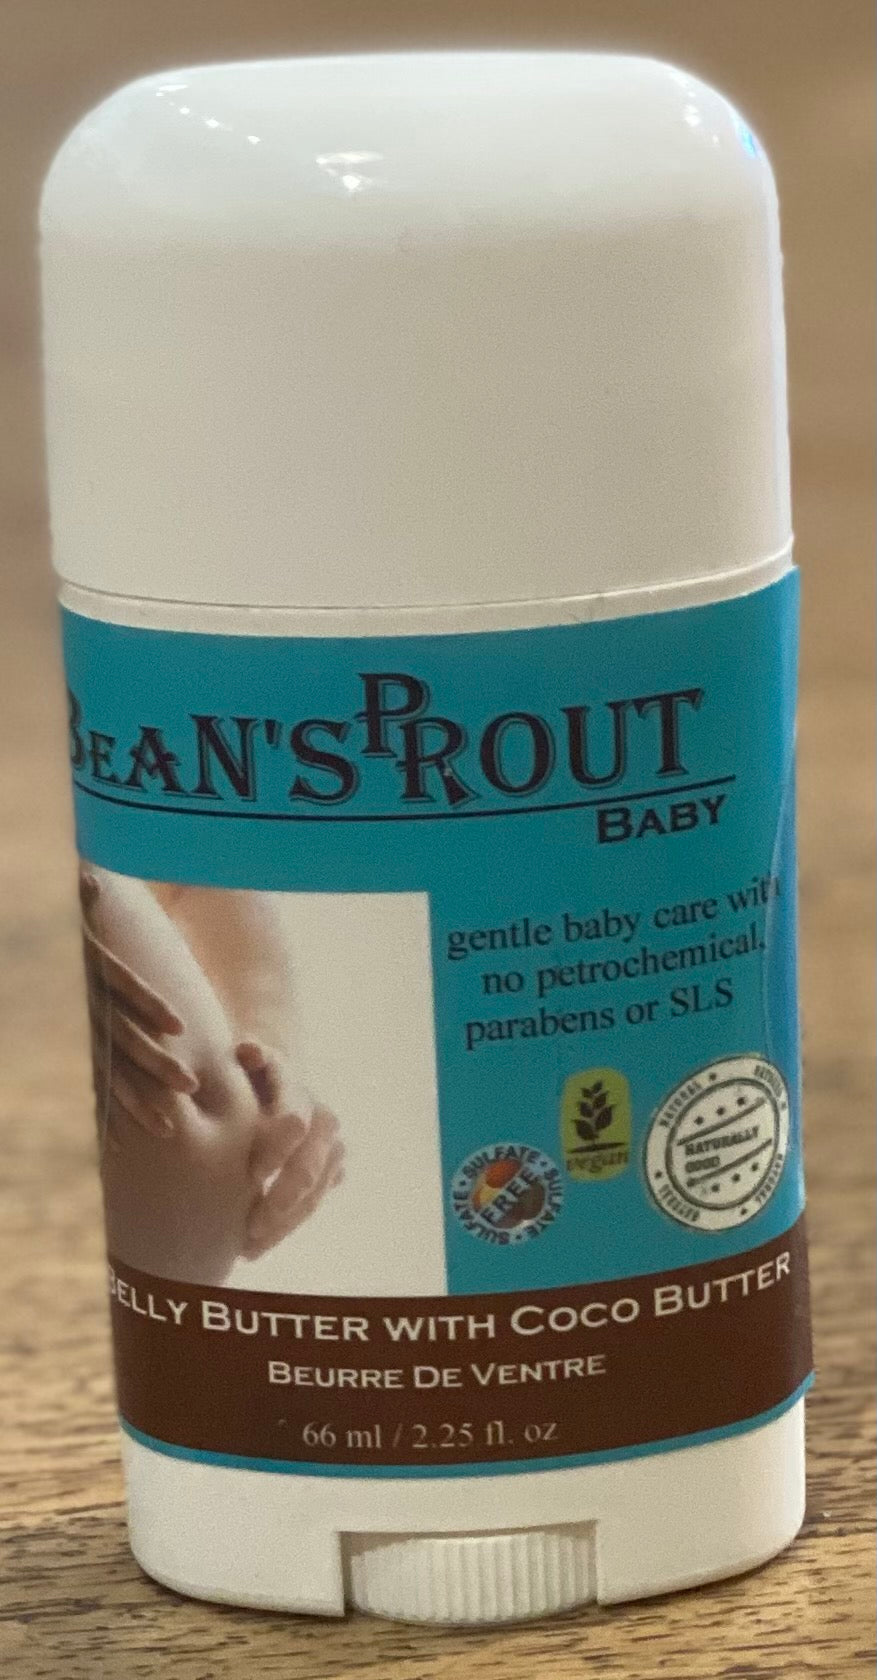 Bean'Sprout Baby Belly Butter with Coco Butter